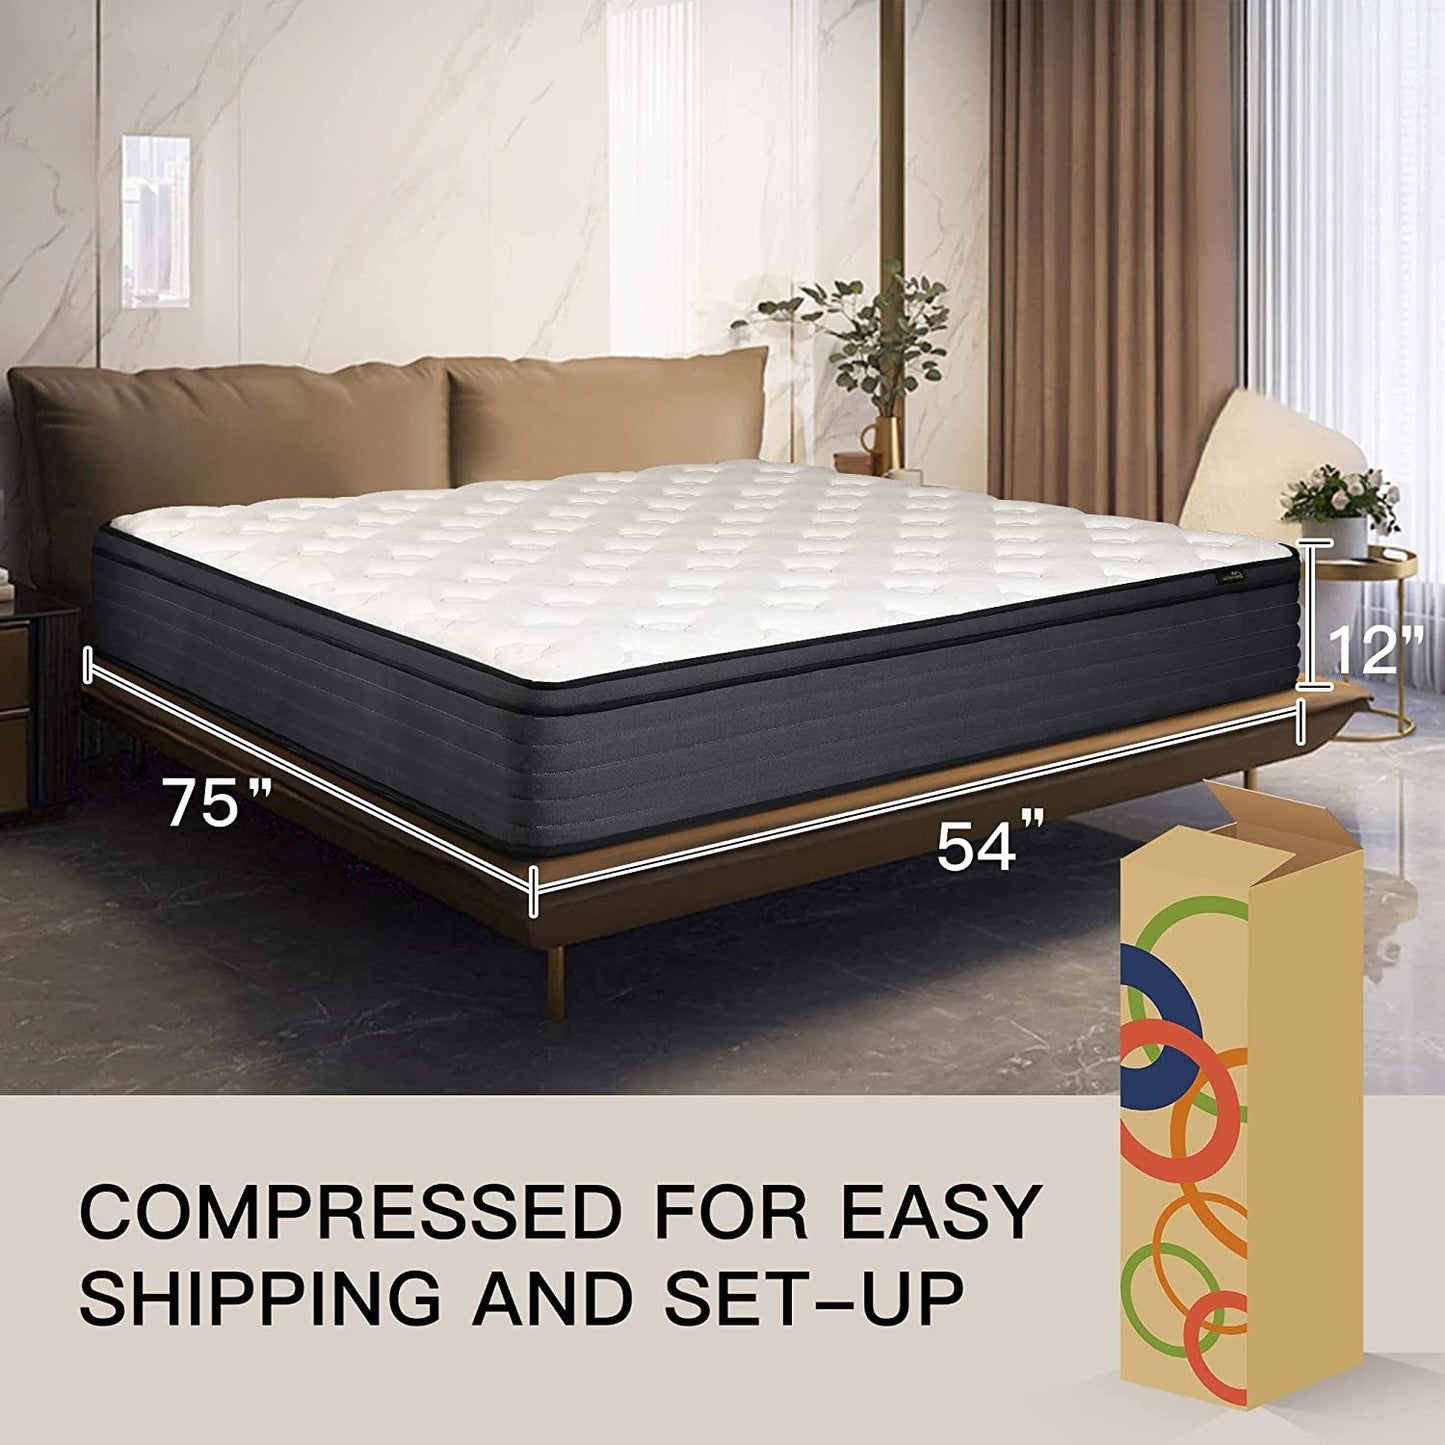 Aicehome Hybrid Mattress High Density Foam Individually Wrapped Pocket Coils Mattresses Motion Isolation Medium Firm